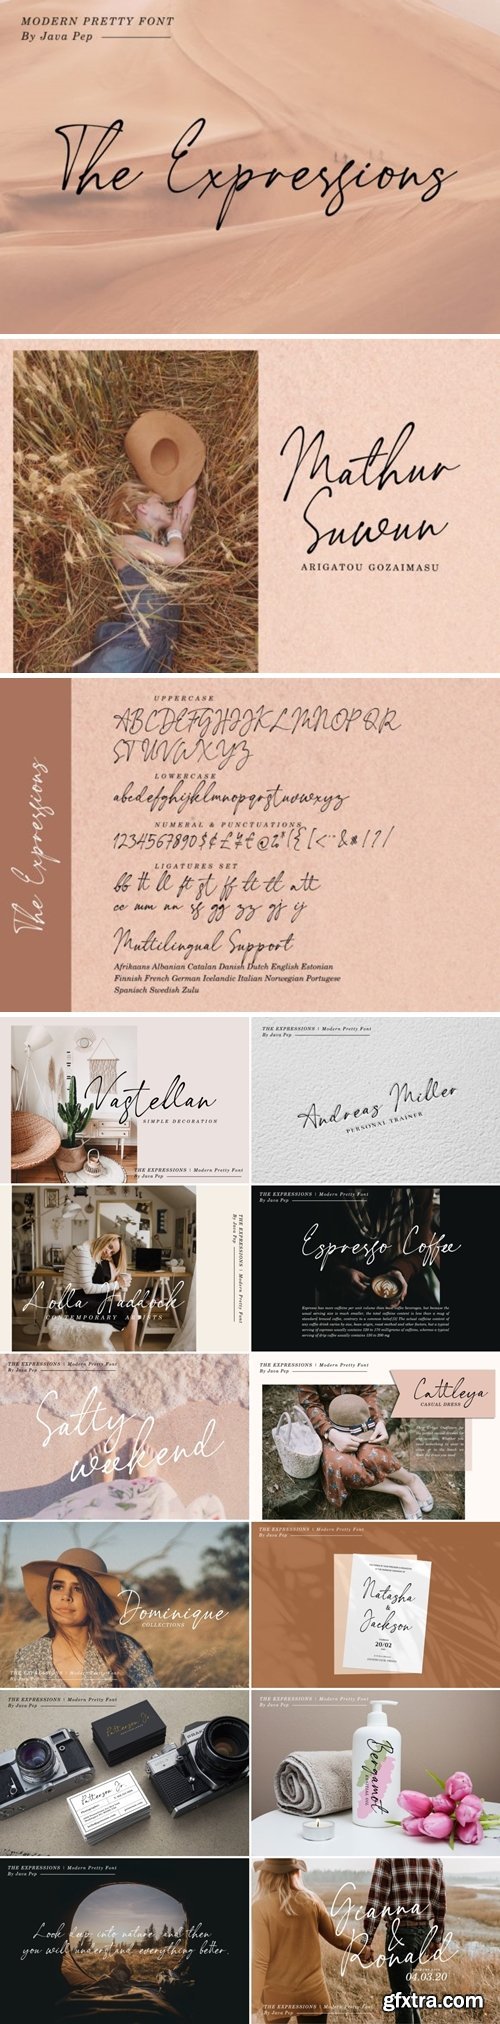 The Expressions / modern pretty font 4595230